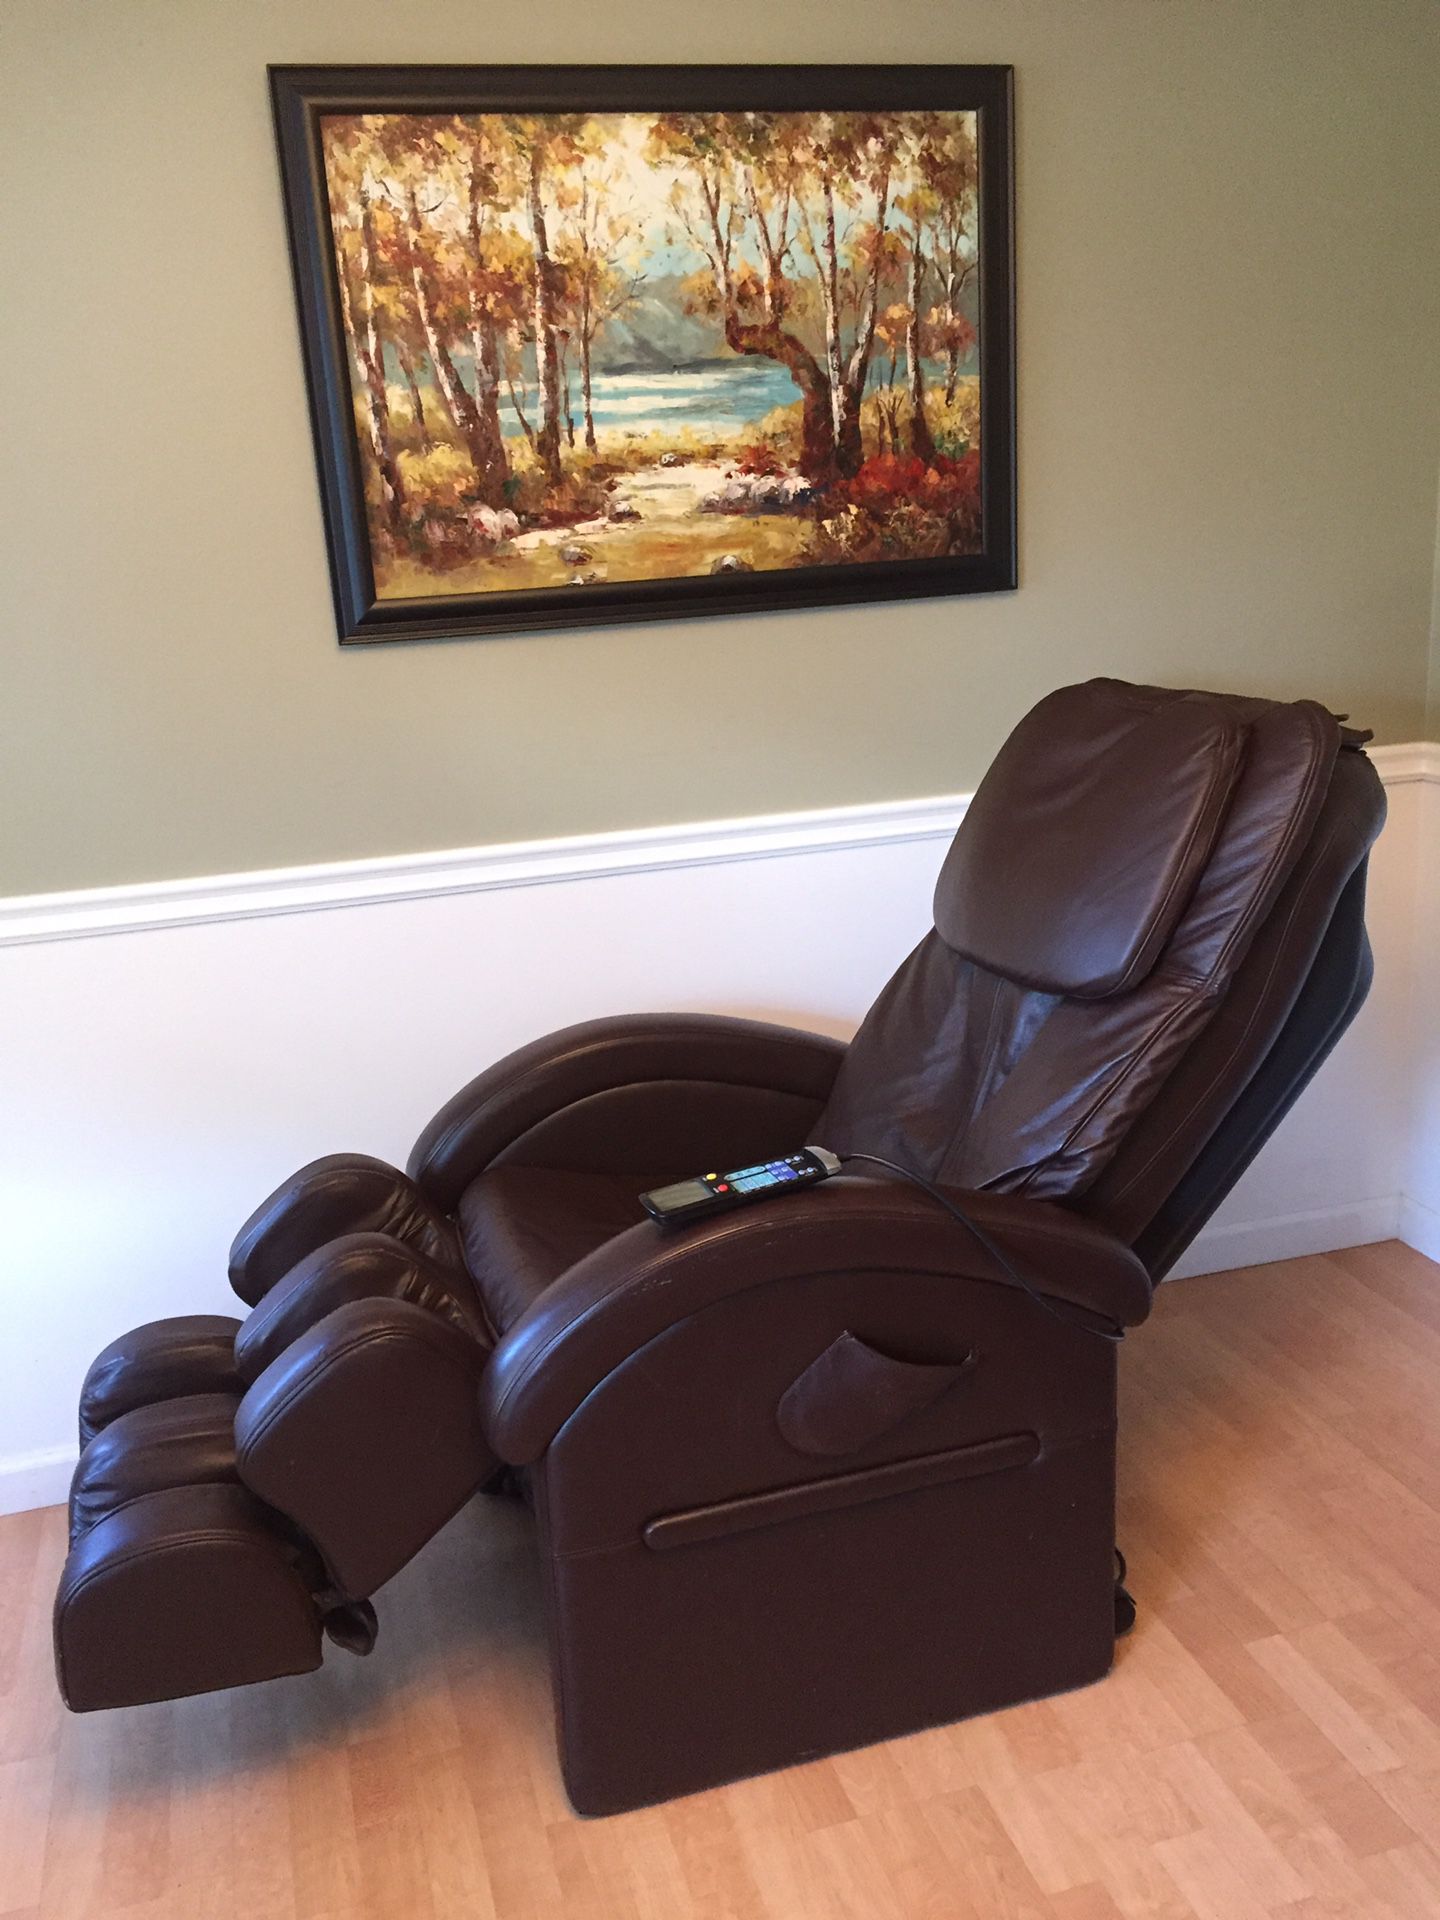 RESTECK Massager for neck and back with heat shiatsu for Sale in Walnut, CA  - OfferUp